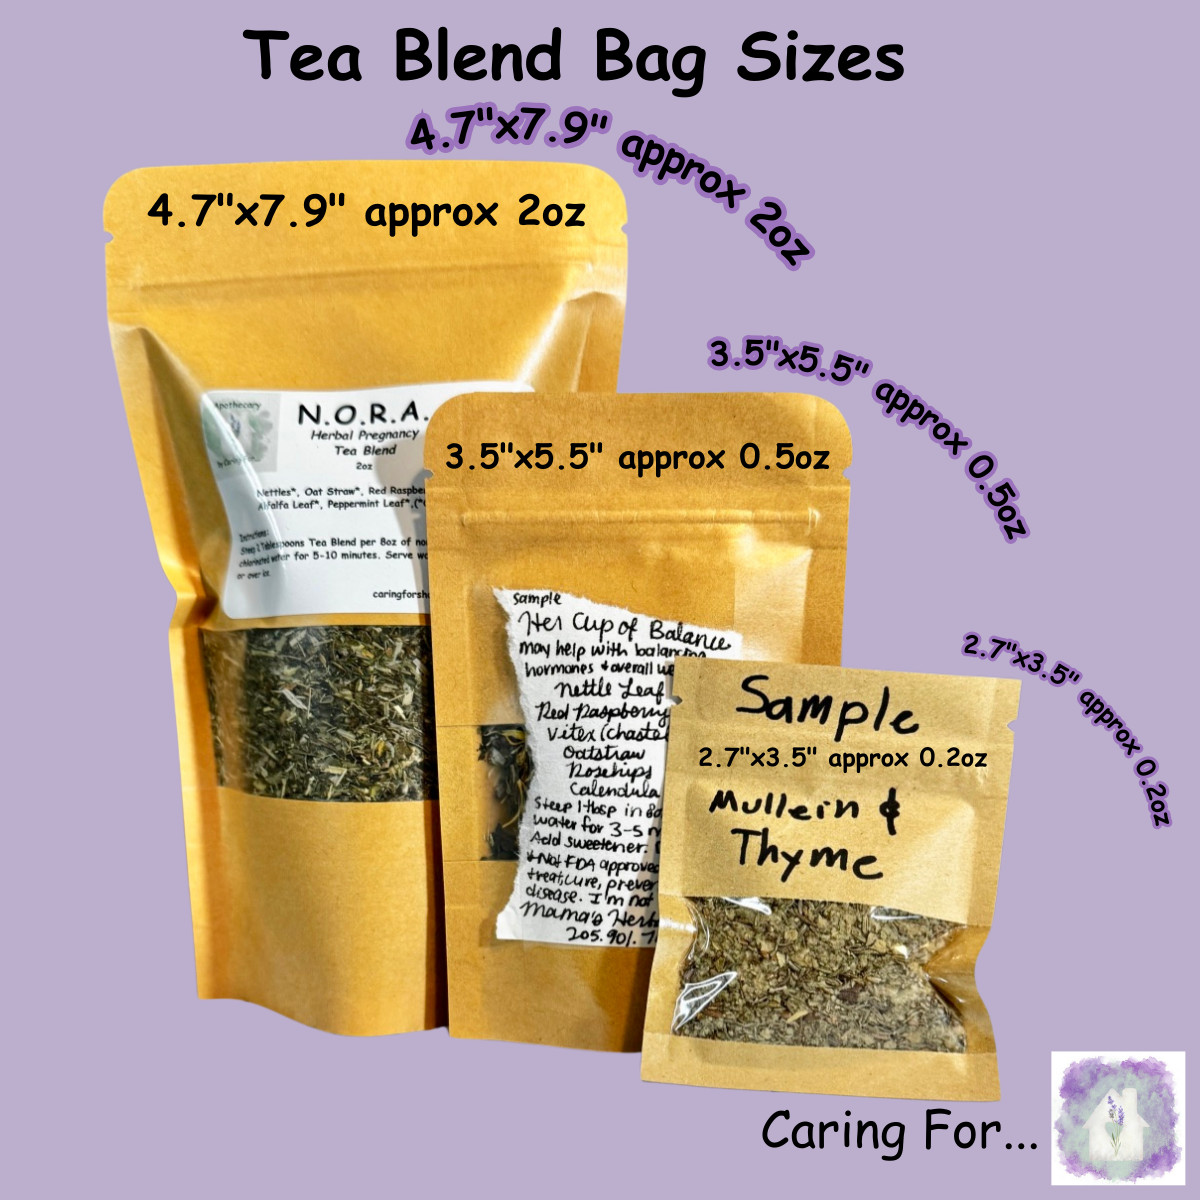 Herbal Tea Blends | Loose Leaf Herbal Tea Blends | Hand Crafted Herbal Tea Blends | By The Holistic Hippy | By Mama's Herbal Home | Check Listing for Options